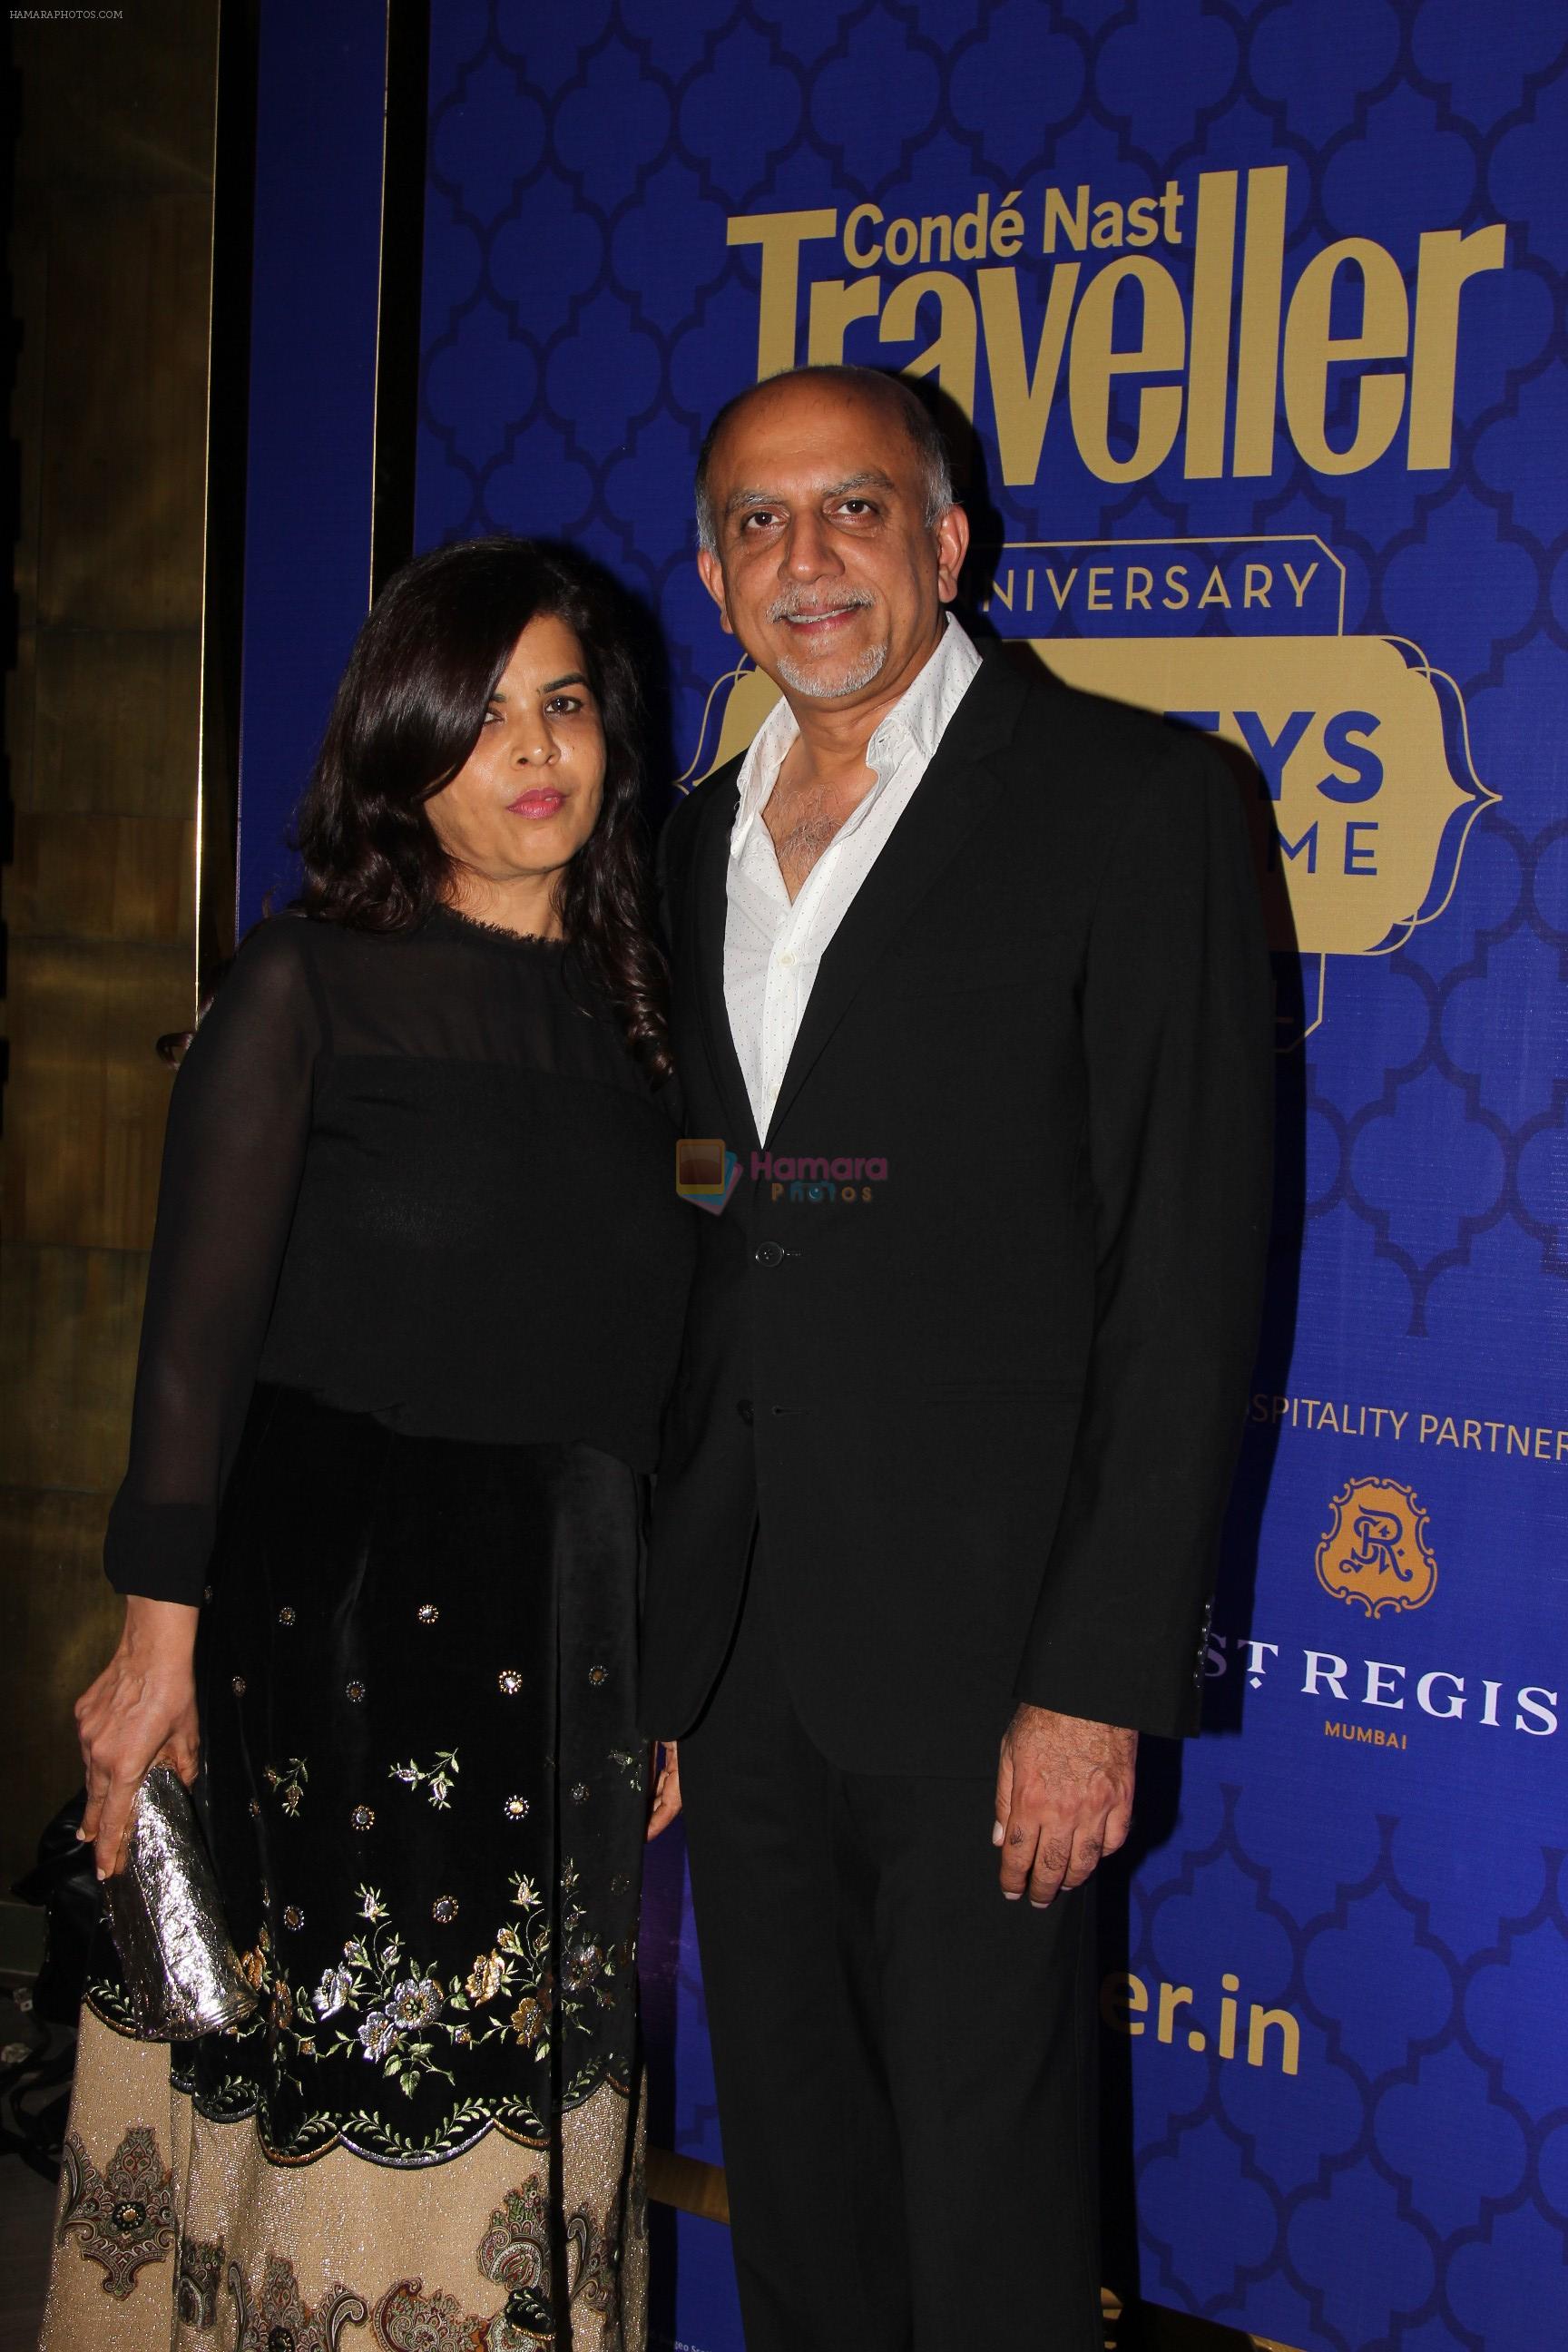 Alex Kuruvilla, Managing Director, Cond� Nast India with wife at Conde Nast Traveller India's 5th anniversary celebrations with   _Journeys of a Lifetime_, St Regis, Mumbai